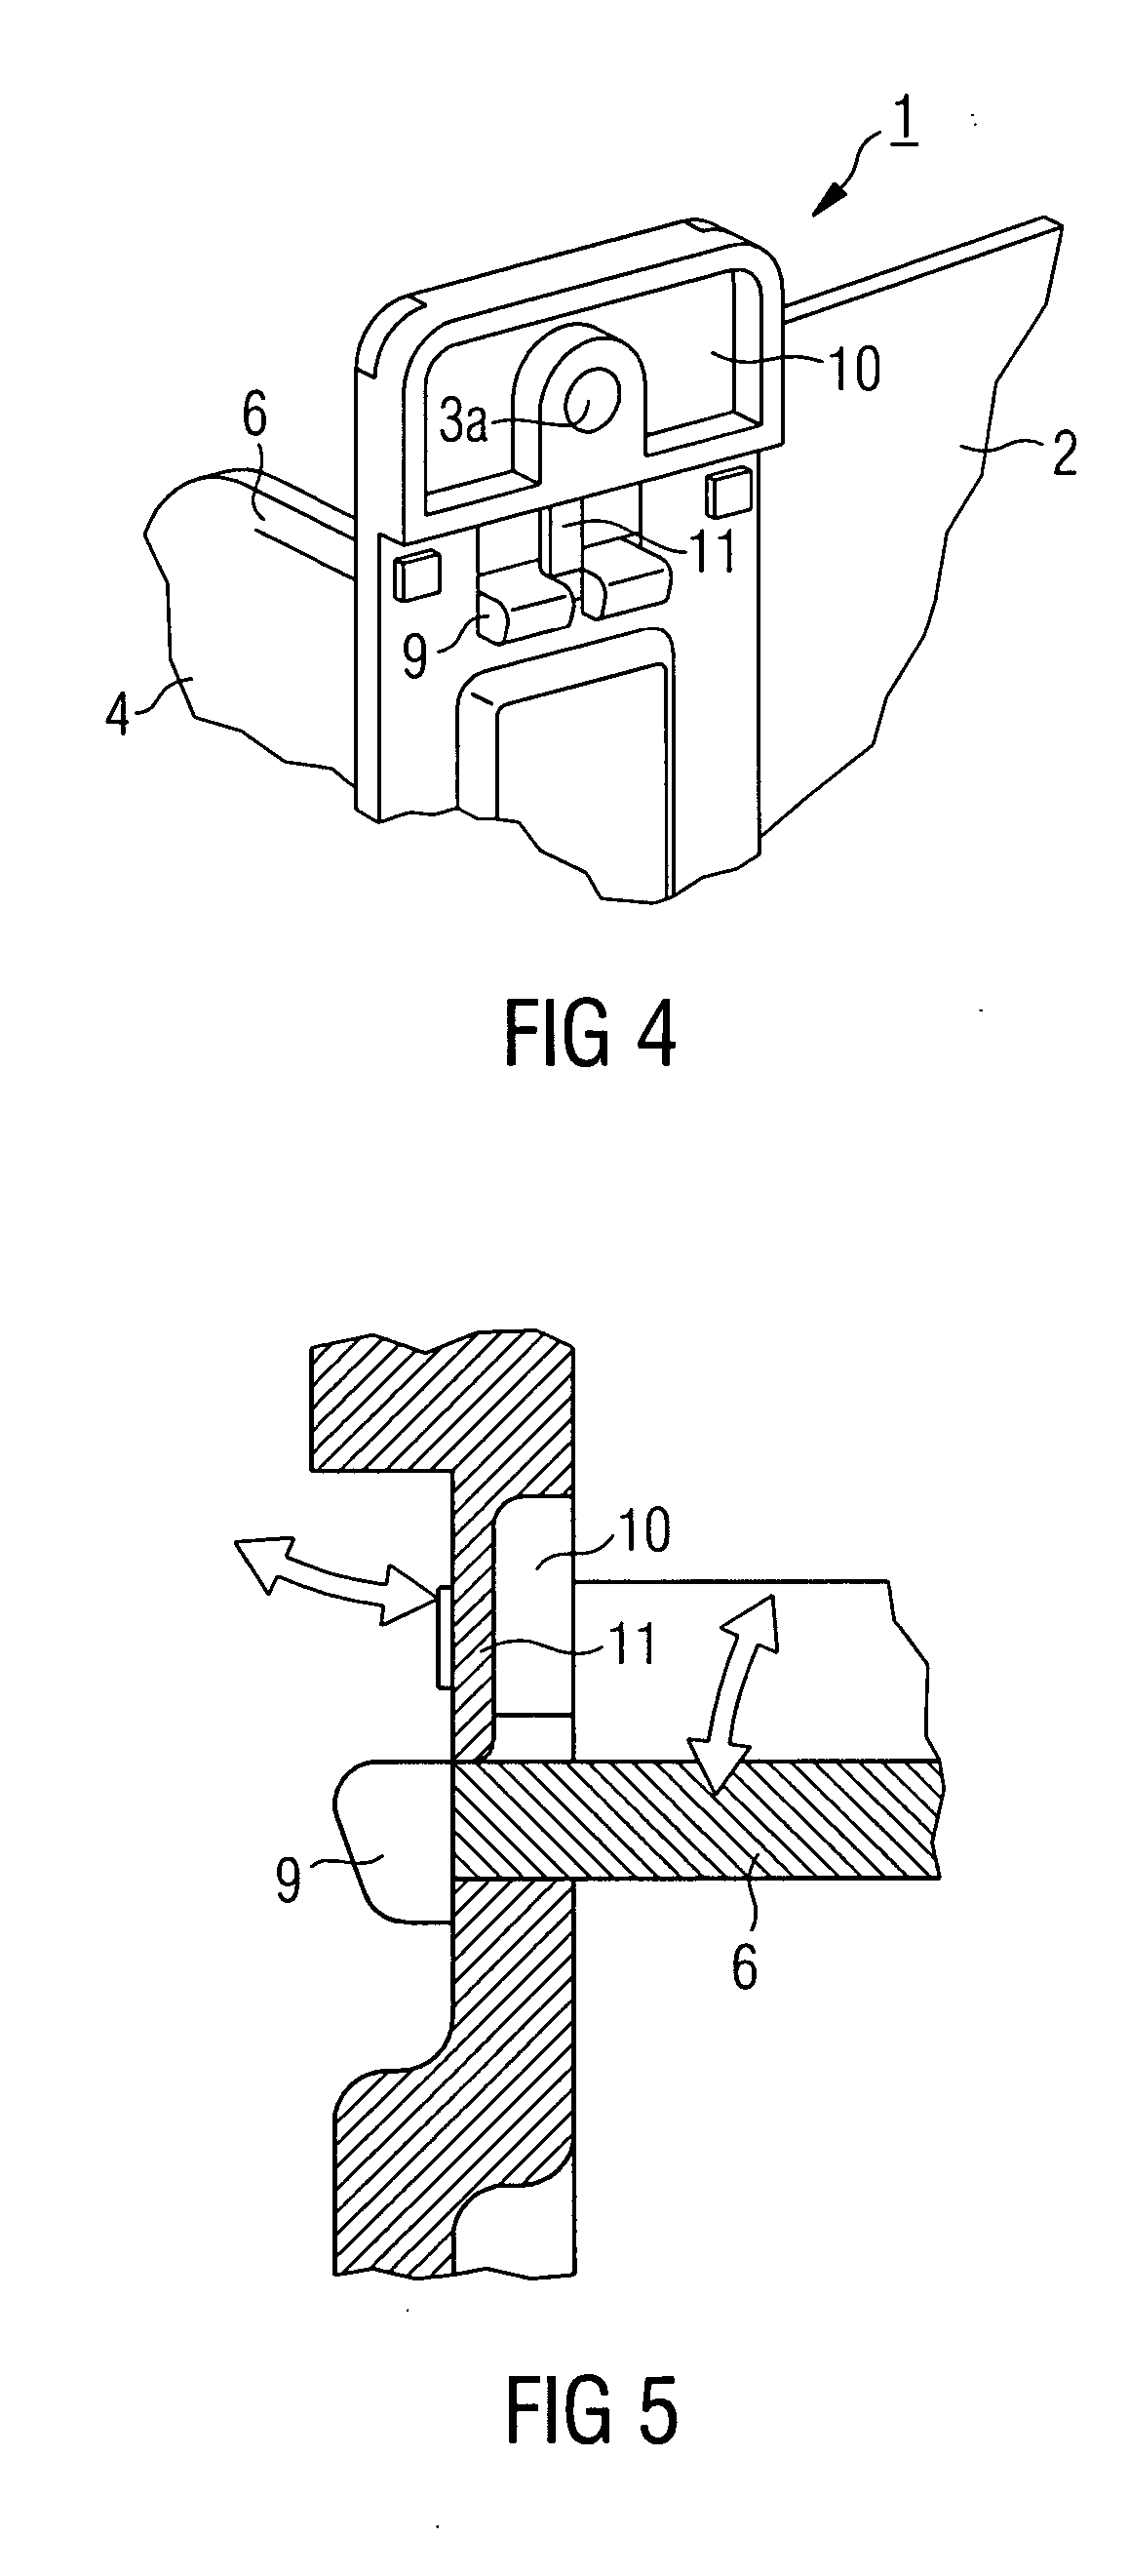 Holder for holding and guiding bundles of cables in aircraft